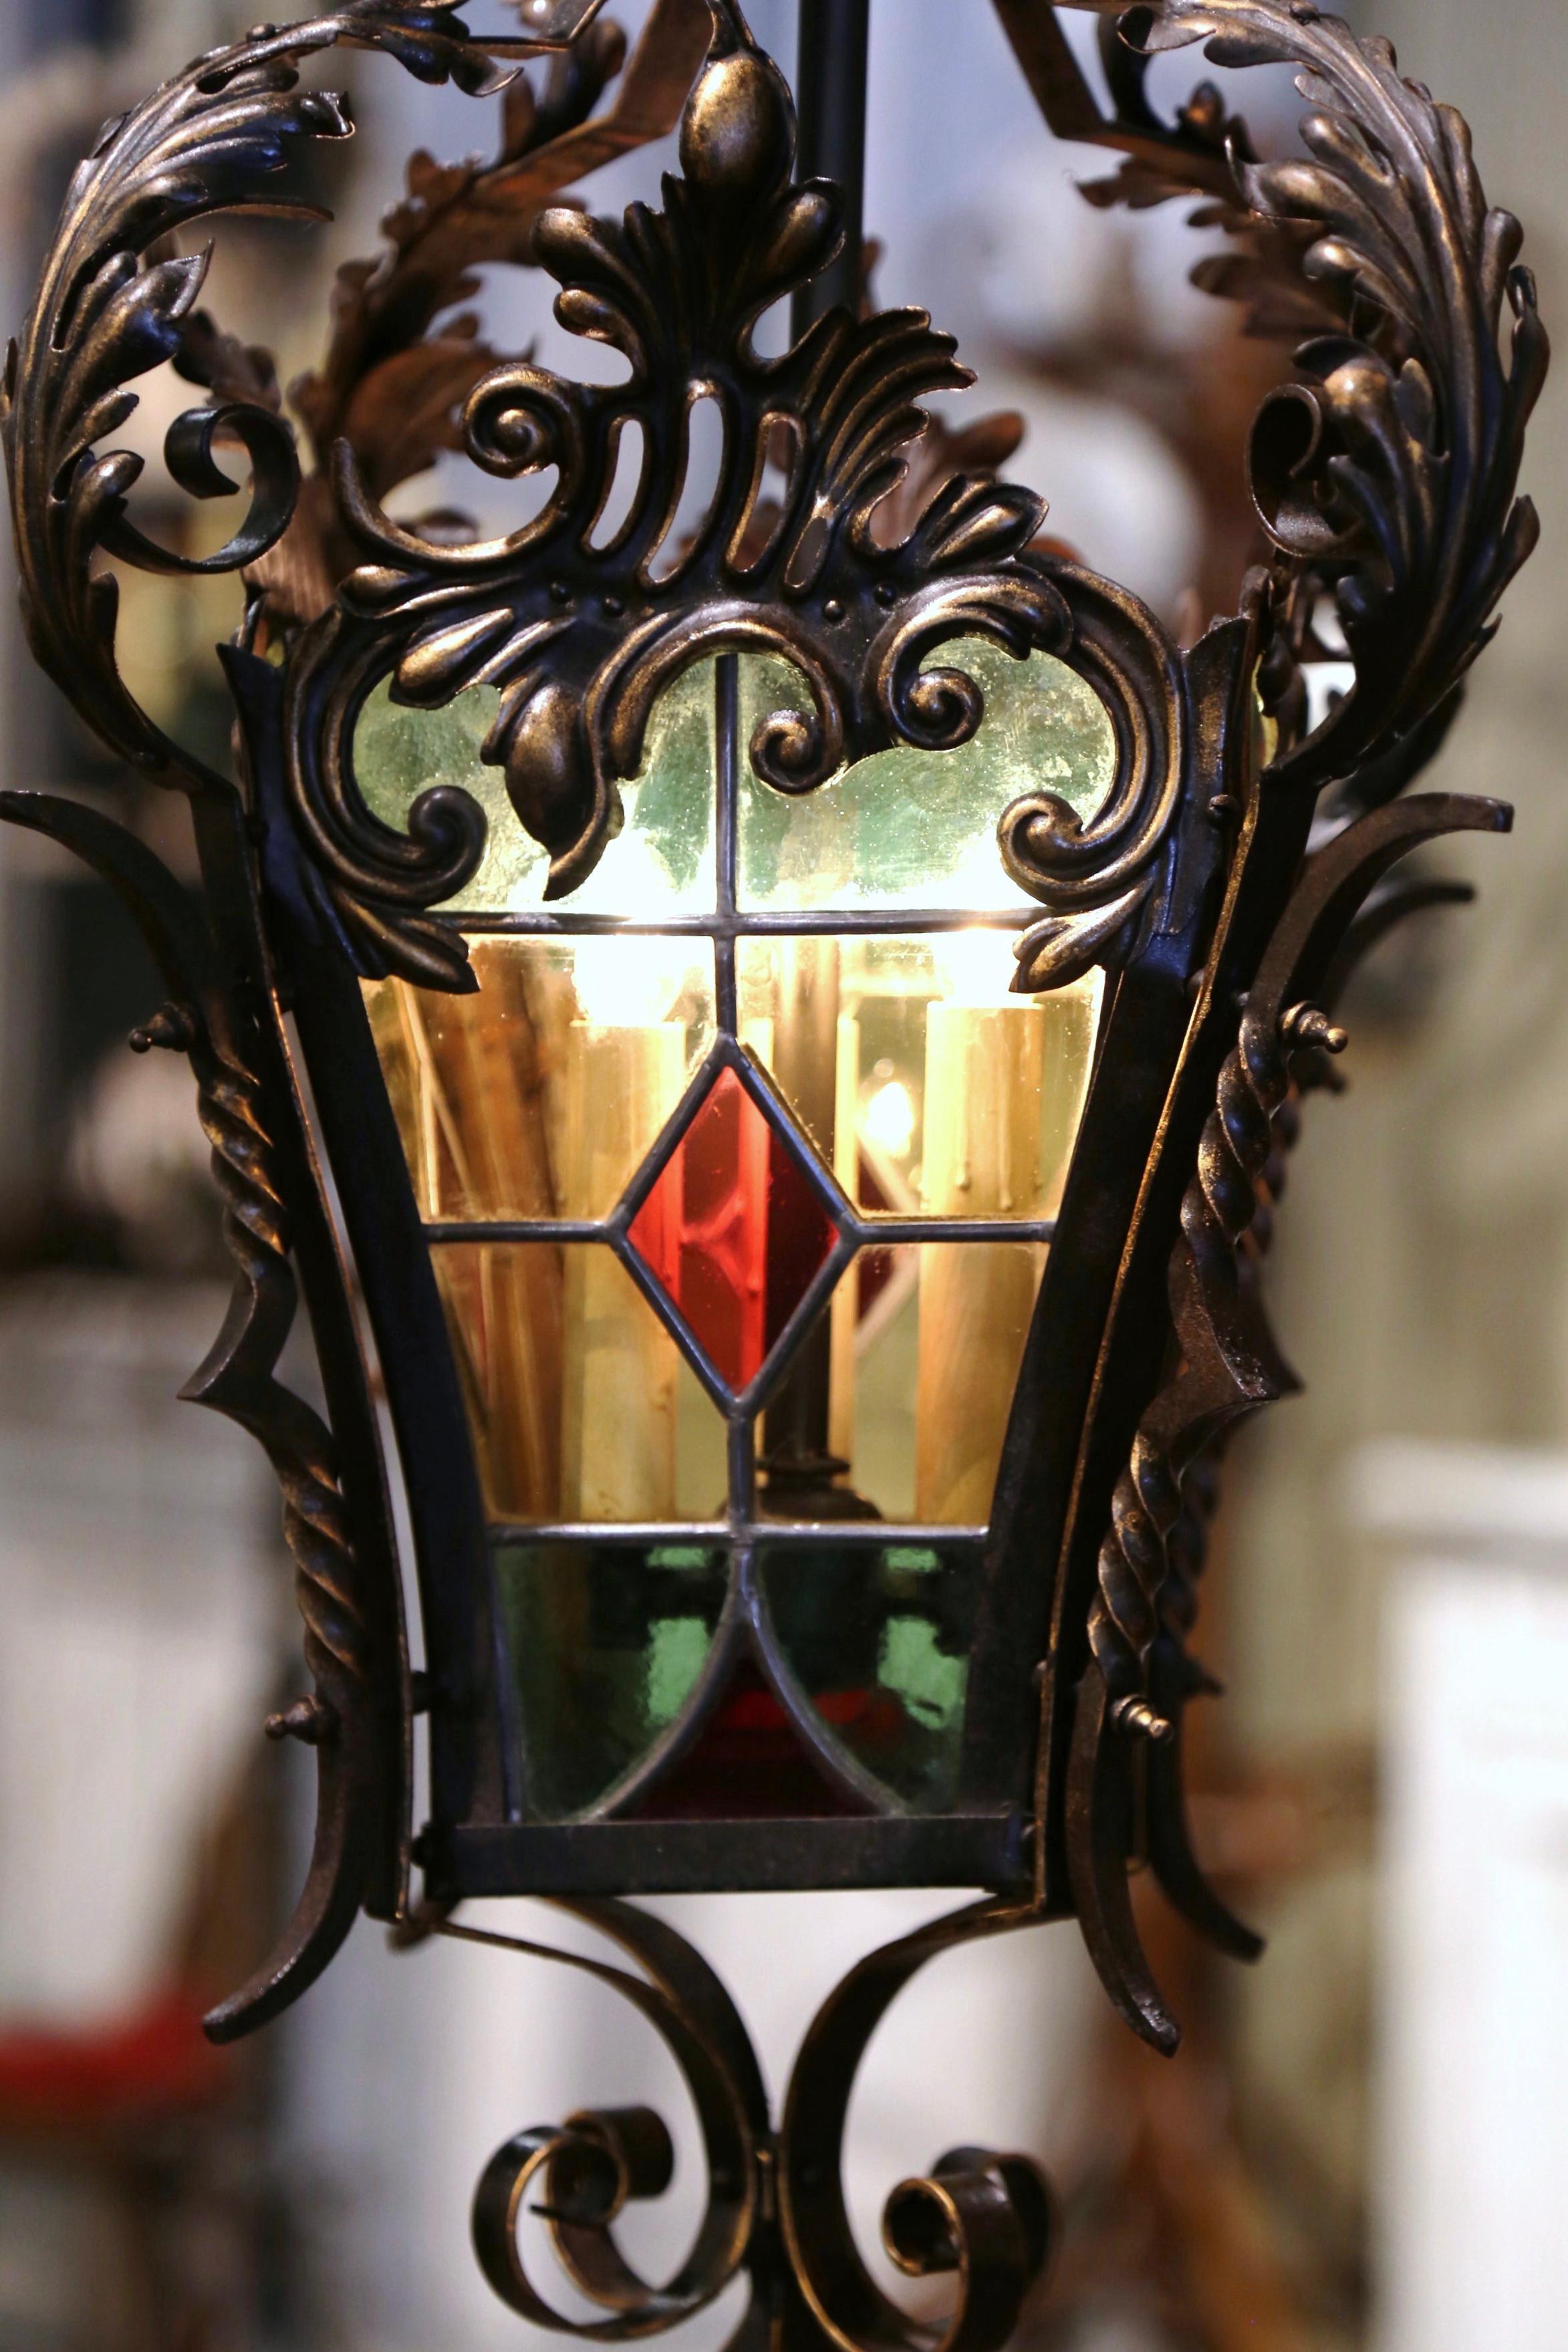 Hang this elegant, Gothic lantern in your entry or powder room. Crafted in France, circa 1870, the antique light fixture features four hand-painted, stained glass panels in the red, green and yellow palette, which are embellished with foliage and